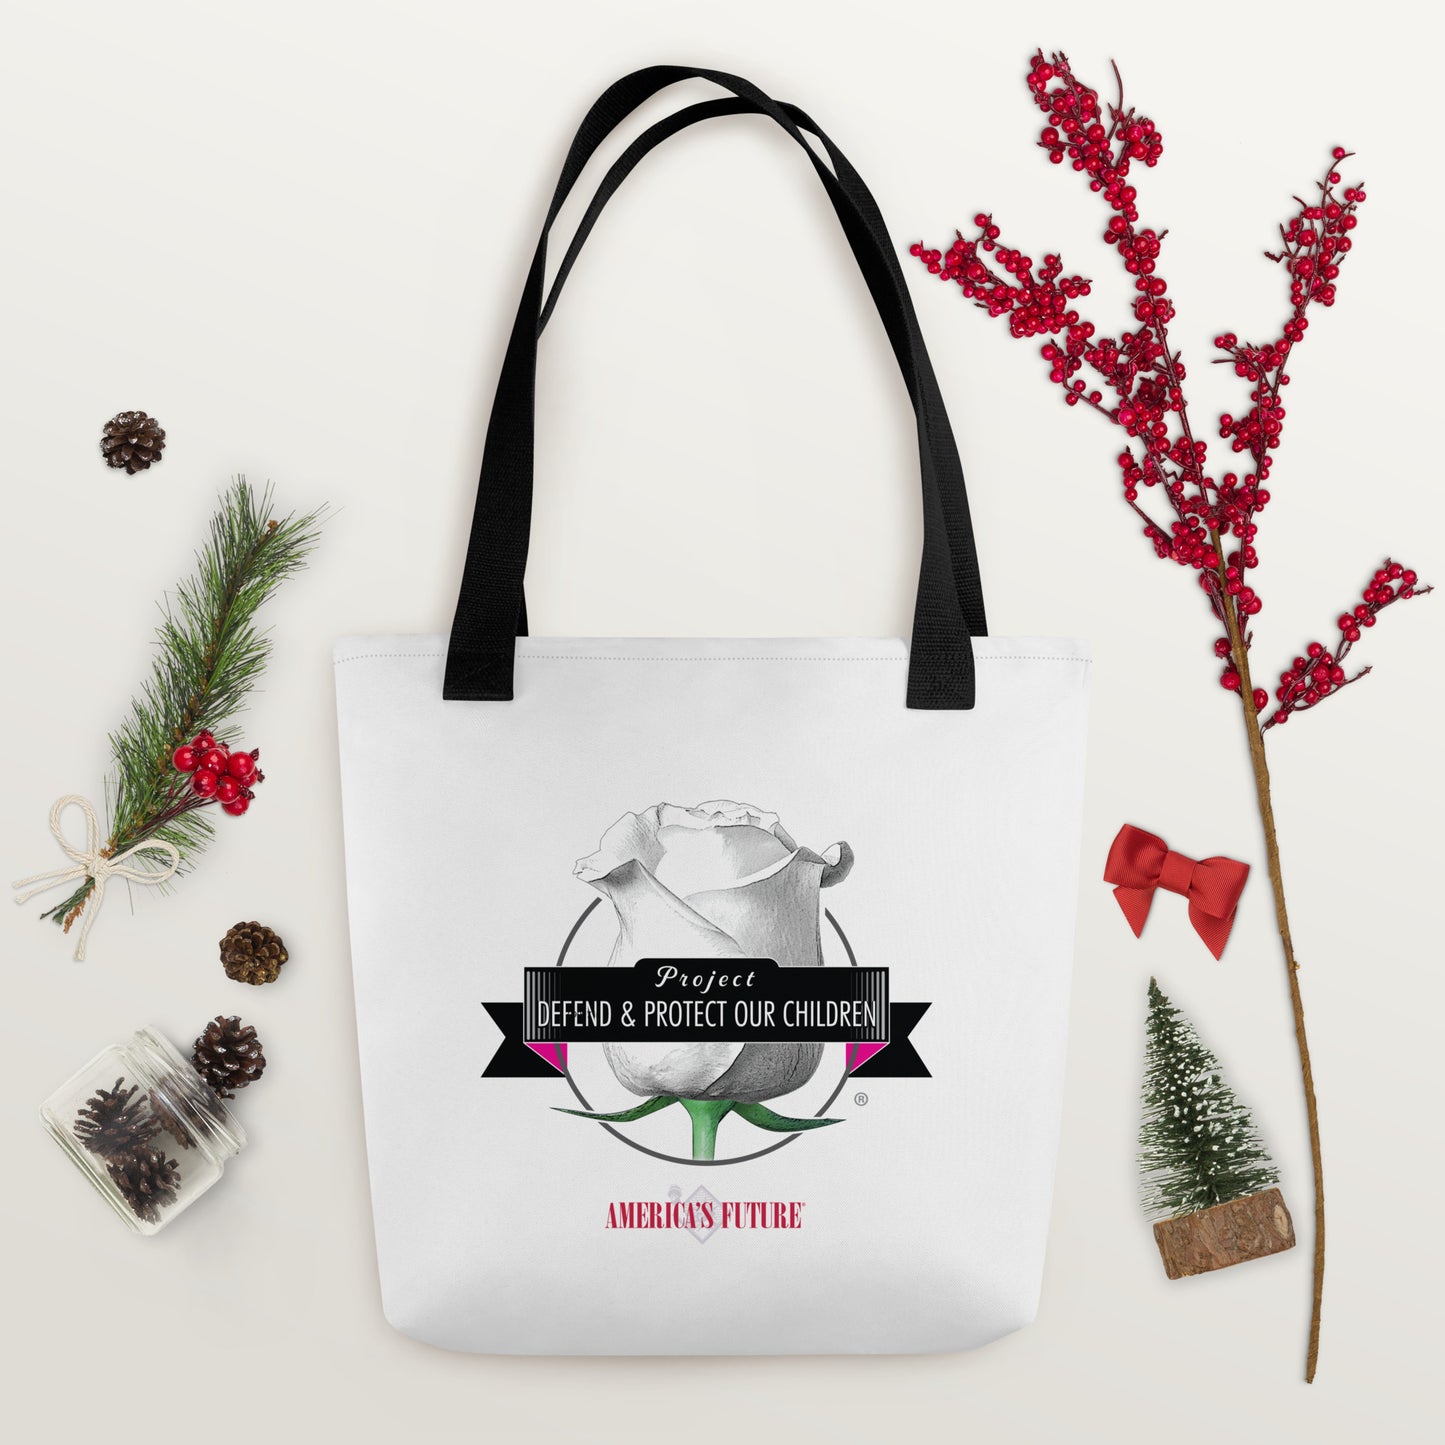 Project Defend & Protect Our Children - Tote bag